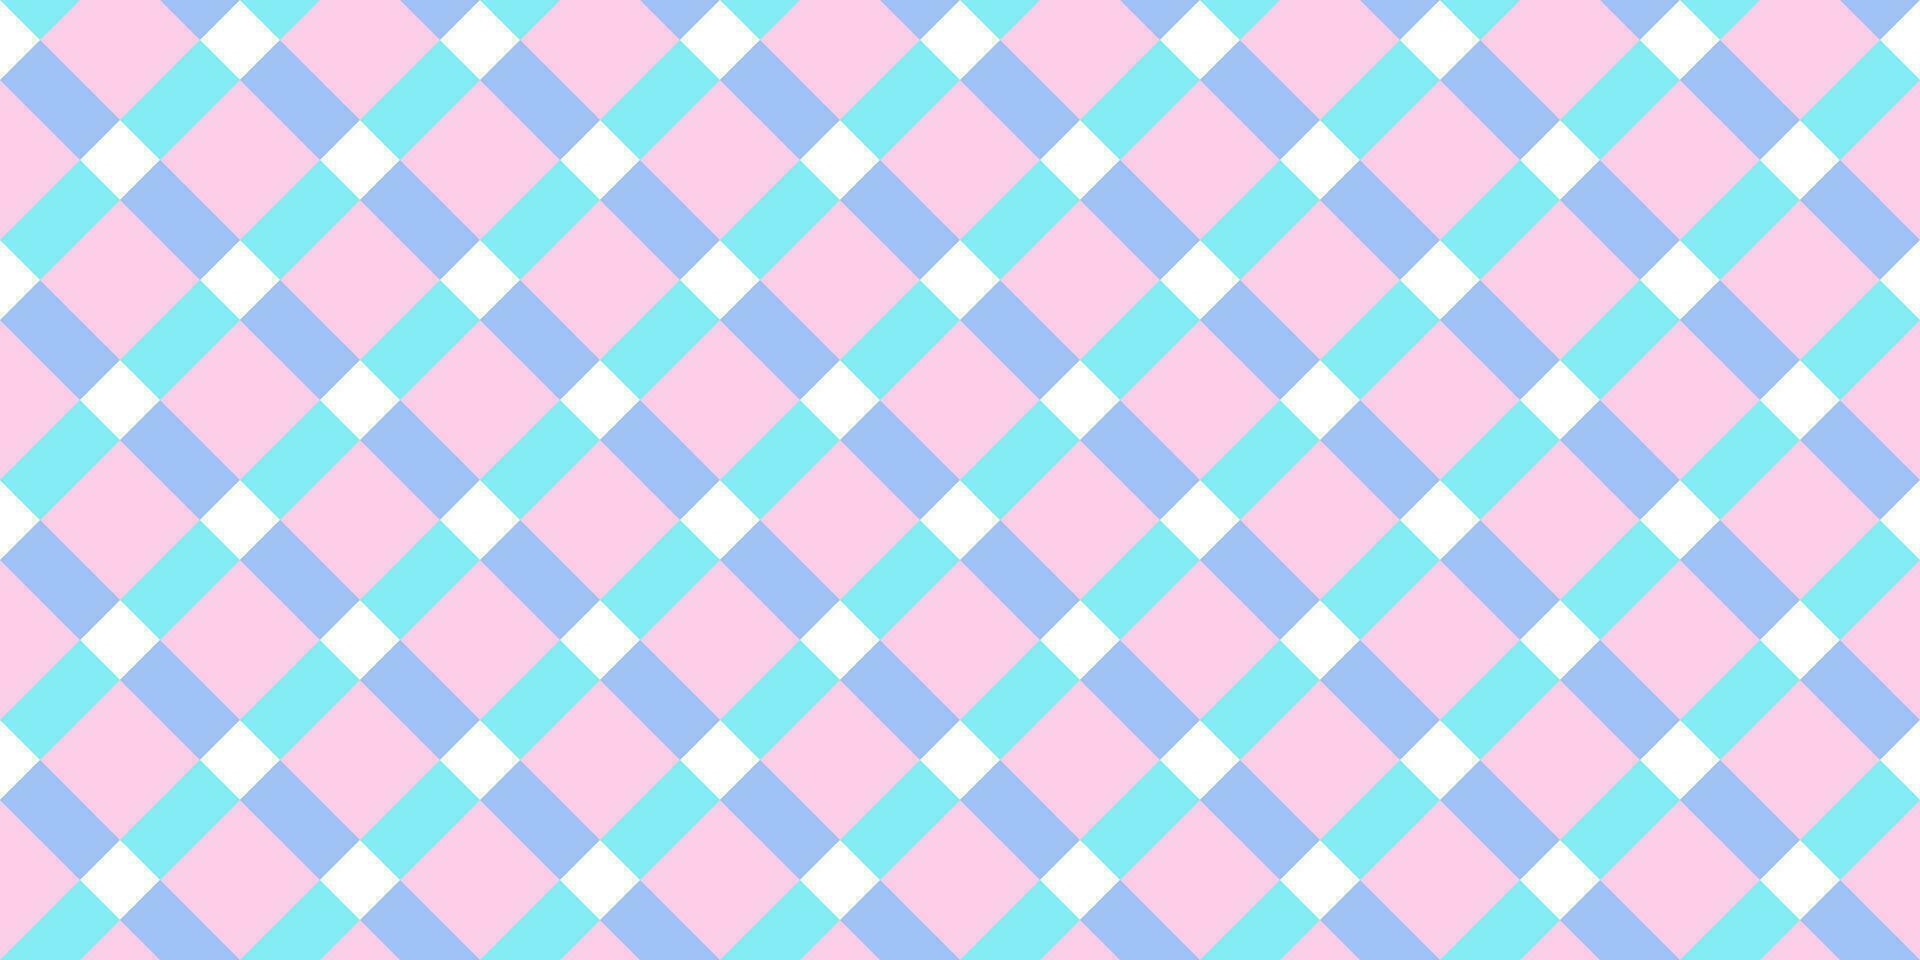 Vichy diagonal seamless pattern in pastel colors for pink doll. Gingham design Birthday, Easter holiday textile decorative. Vector check plaid patterns fabric - picnic blanket, tablecloth, dress.